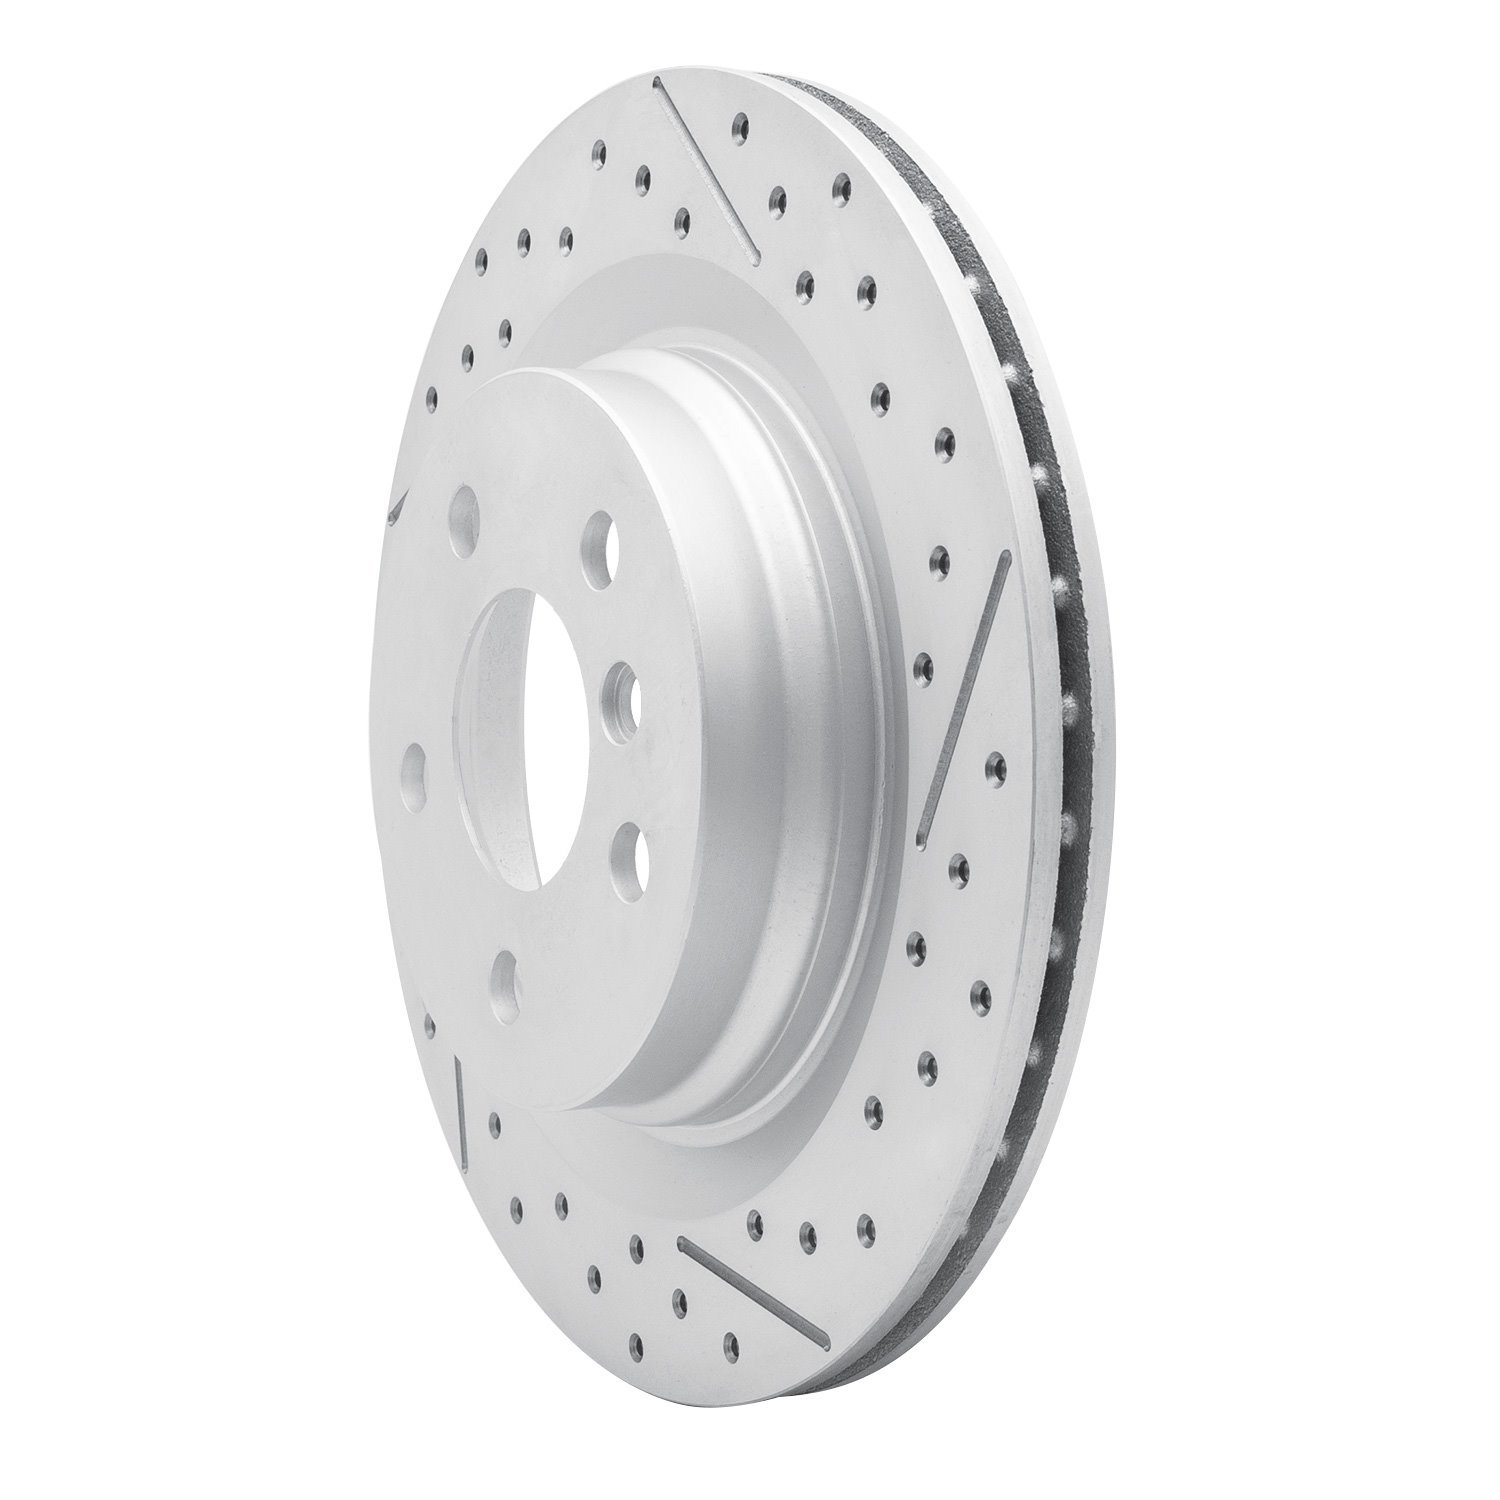 830-31158R Geoperformance Drilled/Slotted Brake Rotor, Fits Select Multiple Makes/Models, Position: Rear Right